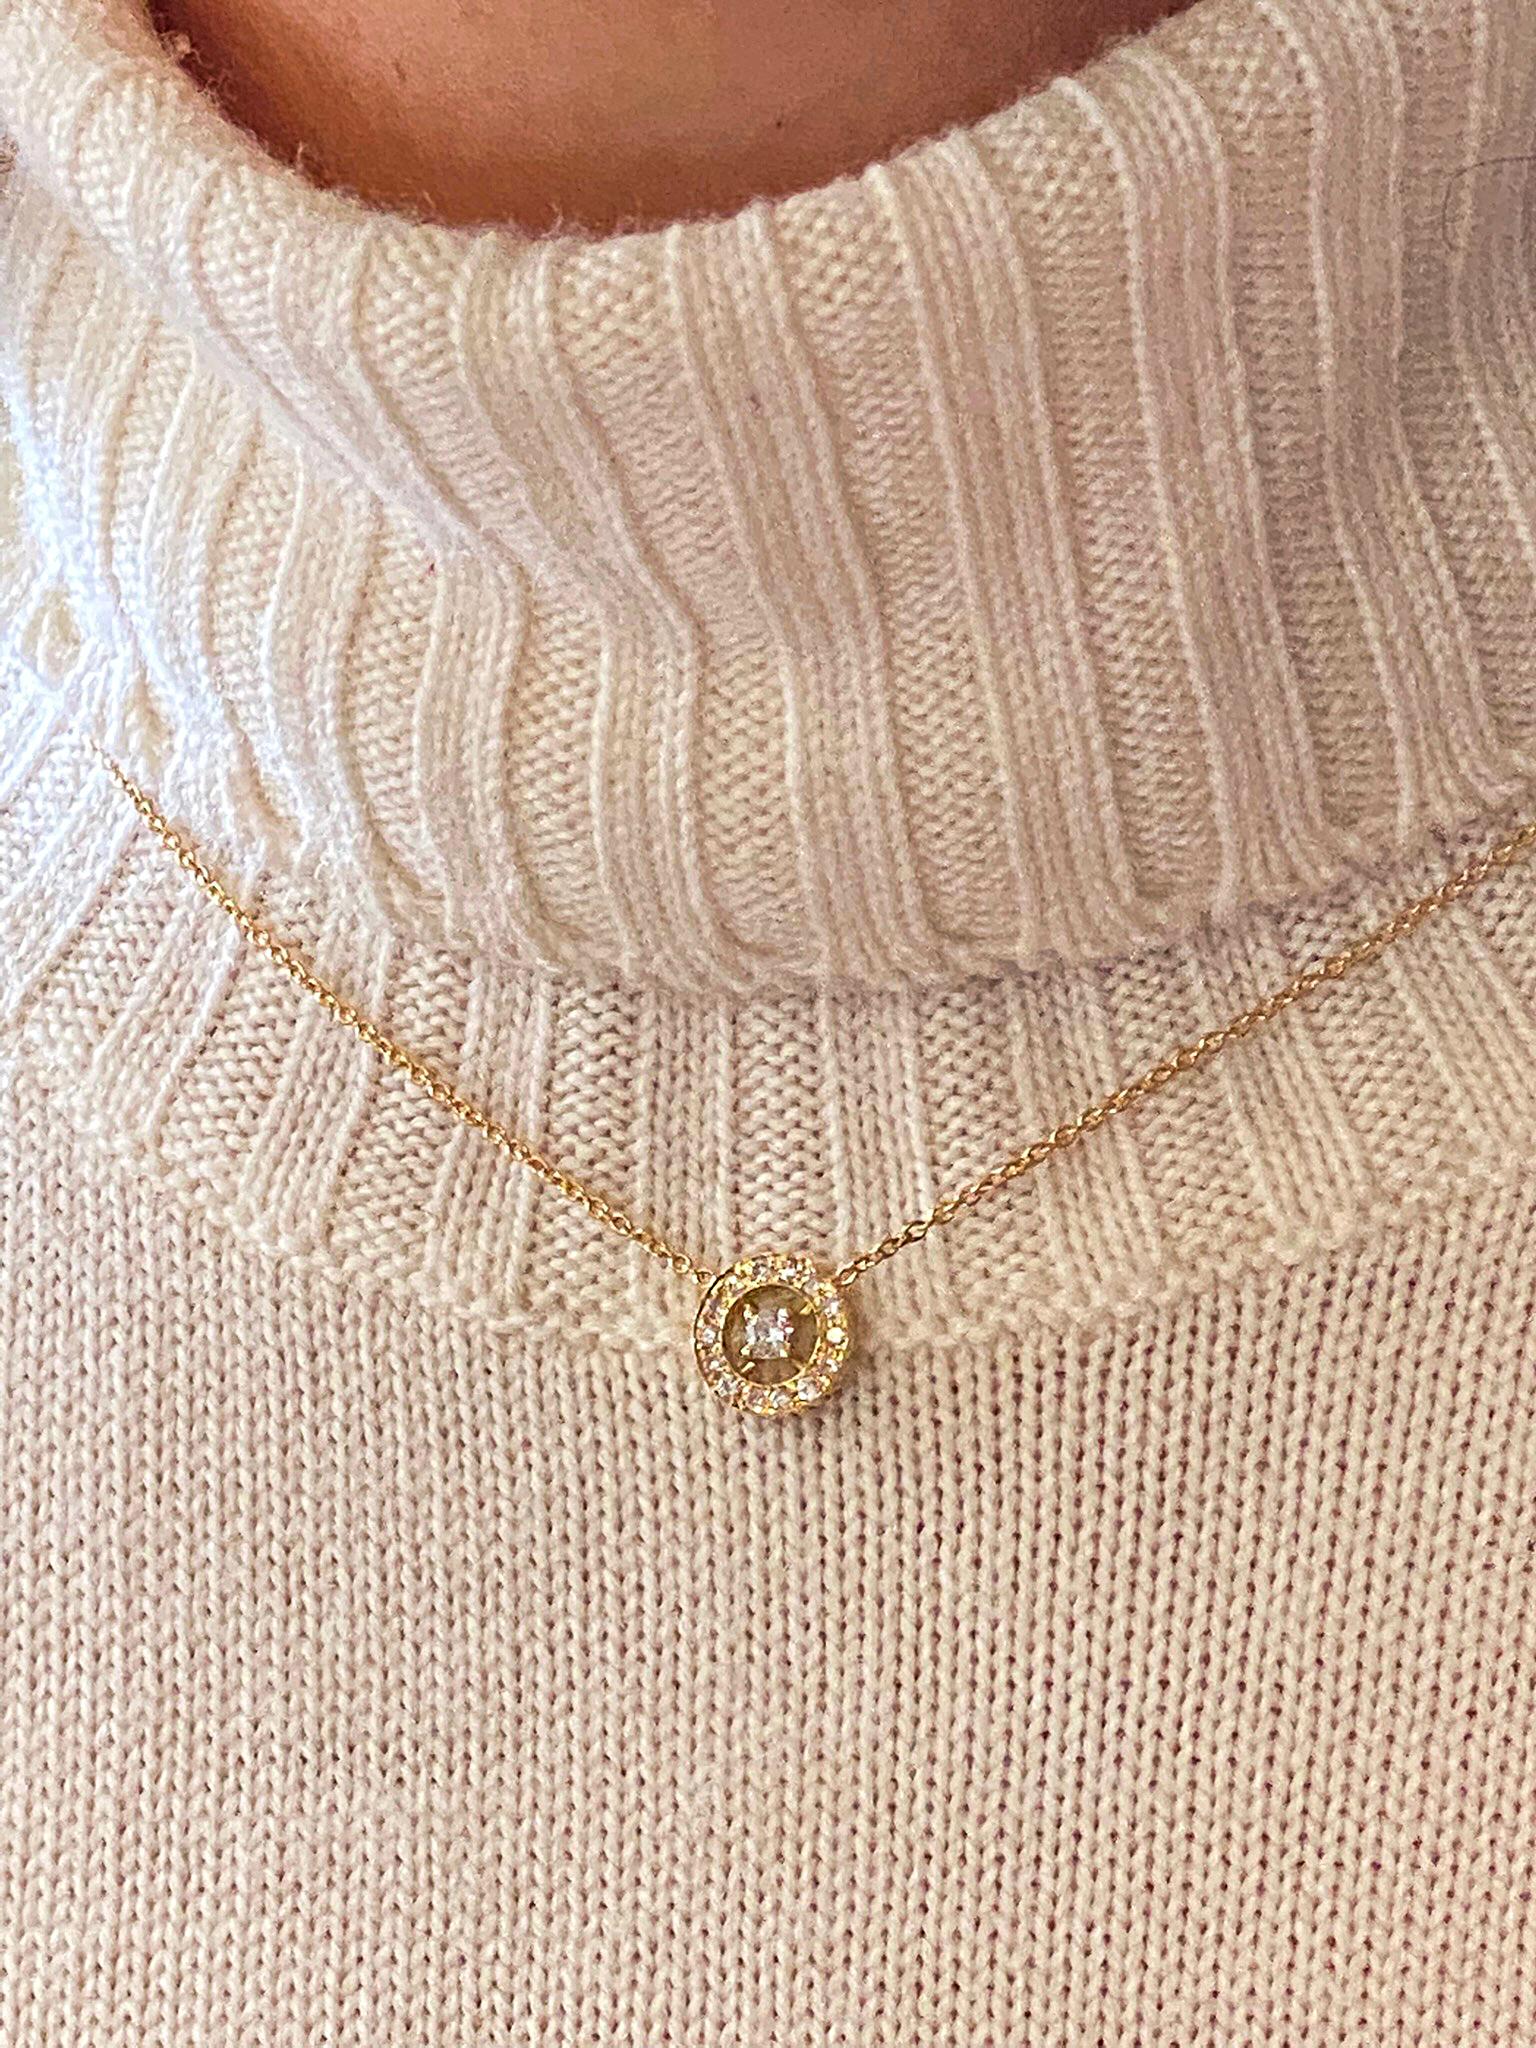 18 Karats Yellow Gold 0.24 Karat White Diamonds Dainty Pendant Chain Necklace
A beautiful simple dainty pendant necklace handcrafted in 18 karats yellow gold and adorned with 0.24 karat brilliant cut white diamonds, 17.71 inches long.
We're a